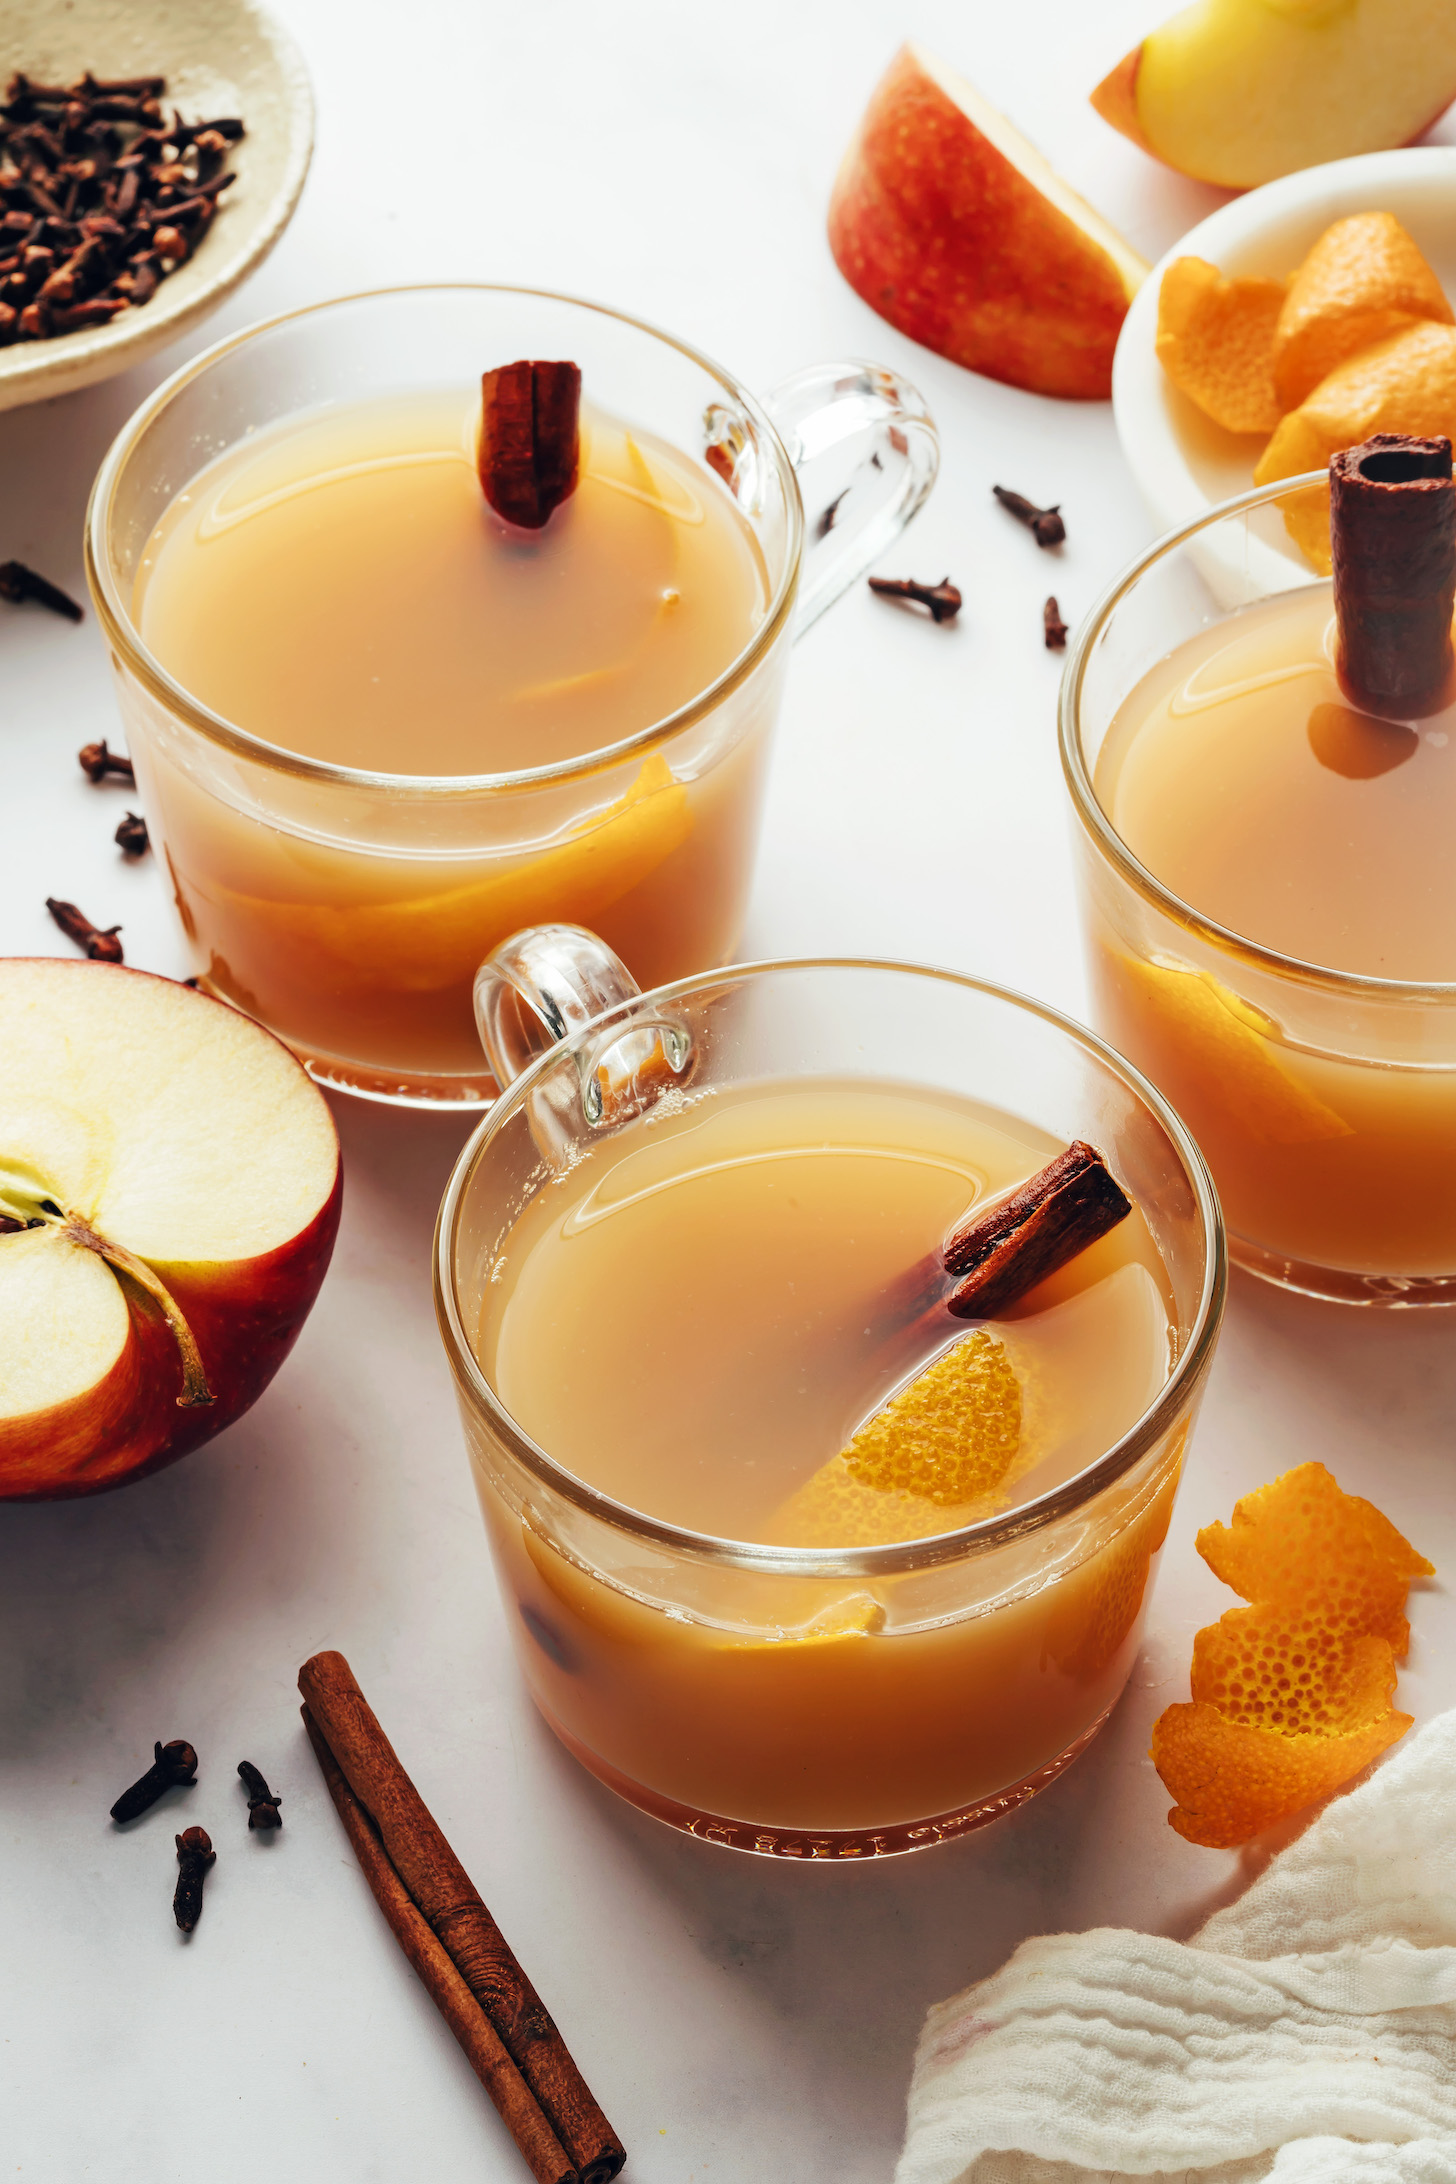 Glass mugs of hot spiced apple cider with cinnamon sticks and orange peel in and around them